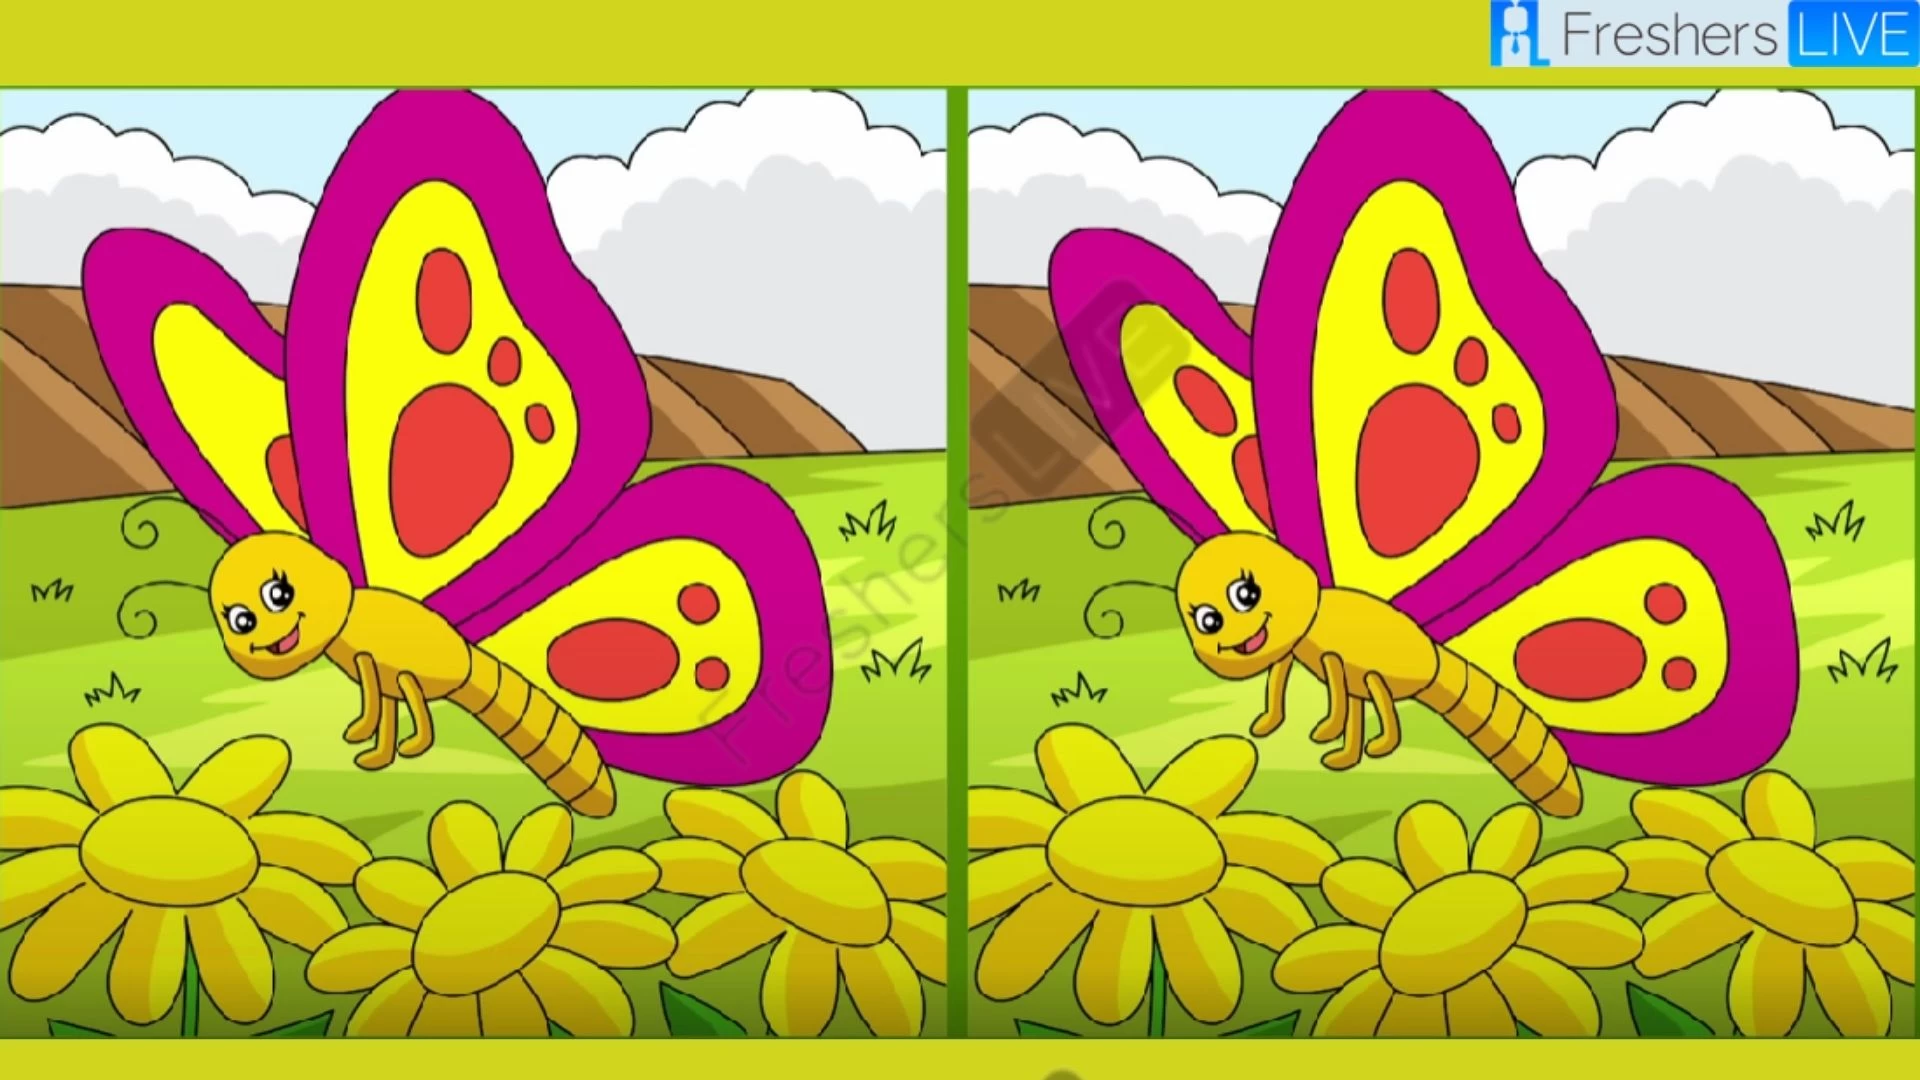 Spot the 3 Differences in the Butterfly Pictures – Test Your Observation Skills!